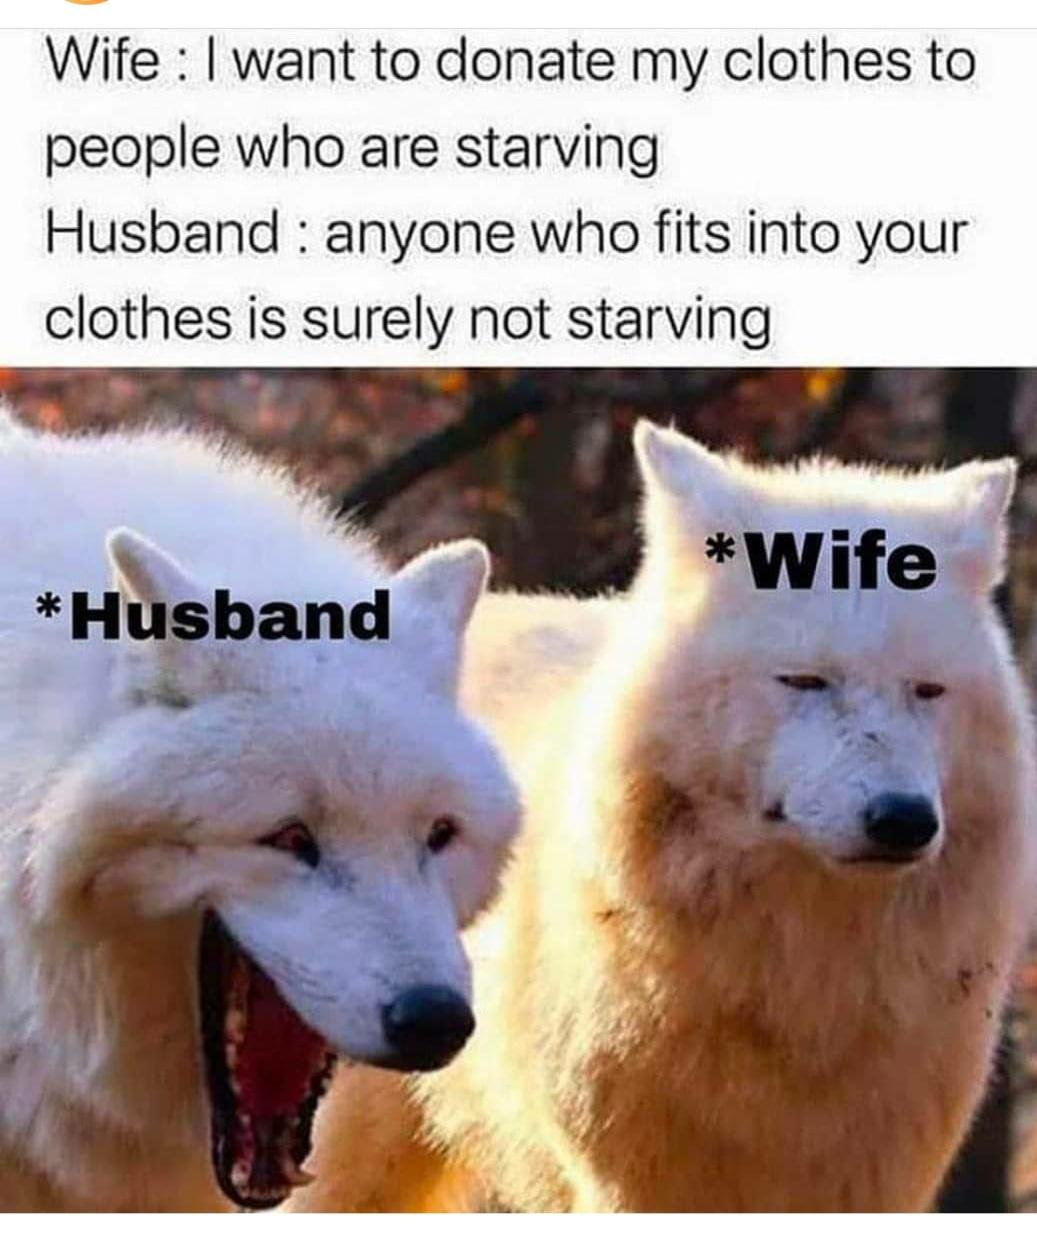 funny memes and random pics - 3 wolves meme - Wife I want to donate my clothes to people who are starving Husband anyone who fits into your clothes is surely not starving Wife Husband